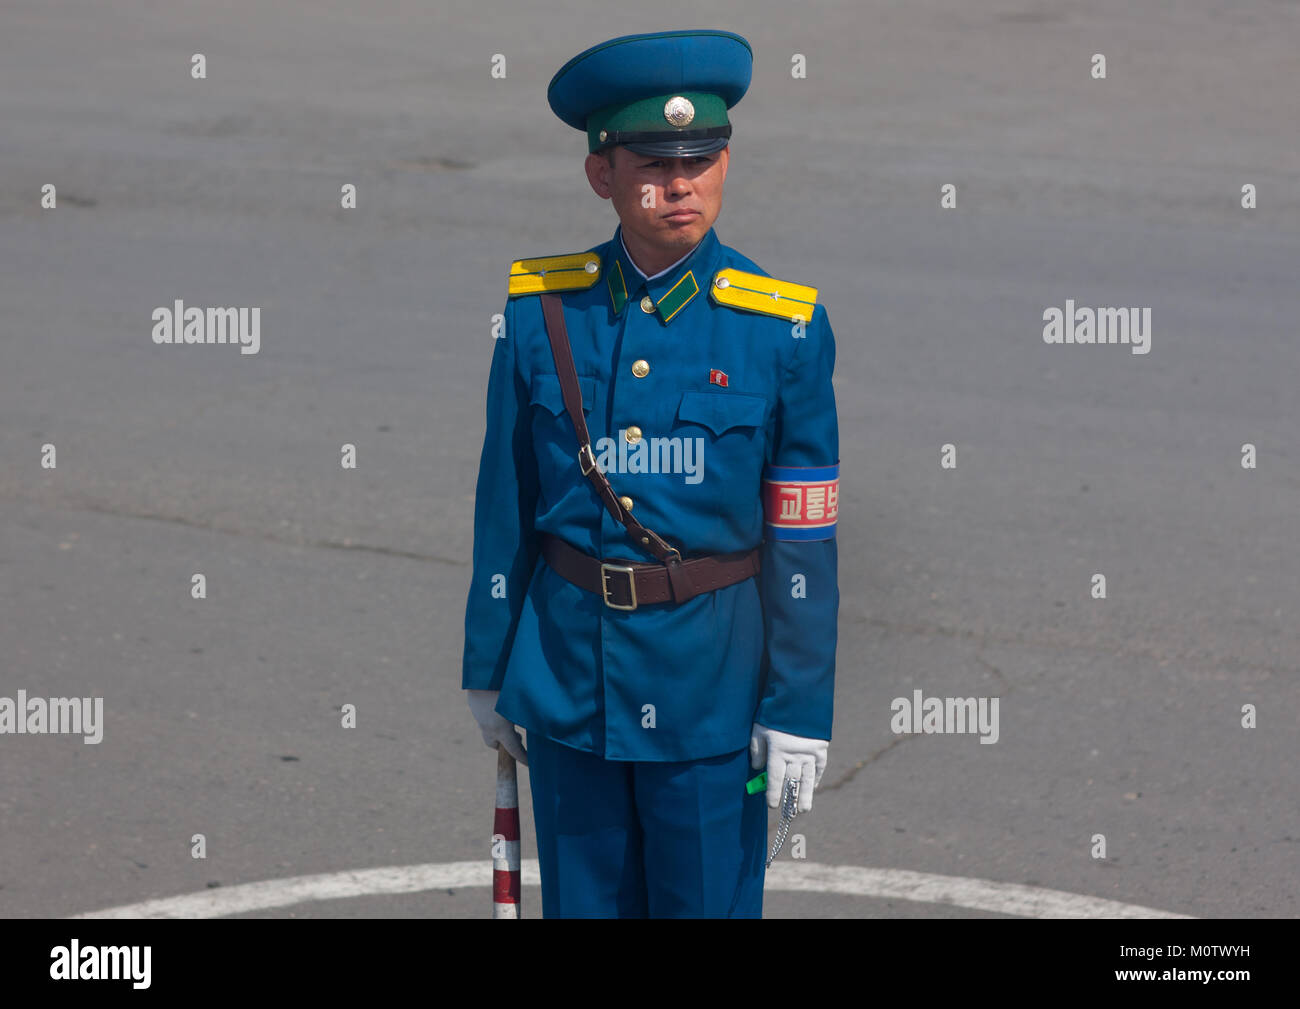 North Korean male traffic security officer in blue unform in the street,  South Pyongan Province, Nampo, North Korea Stock Photo - Alamy